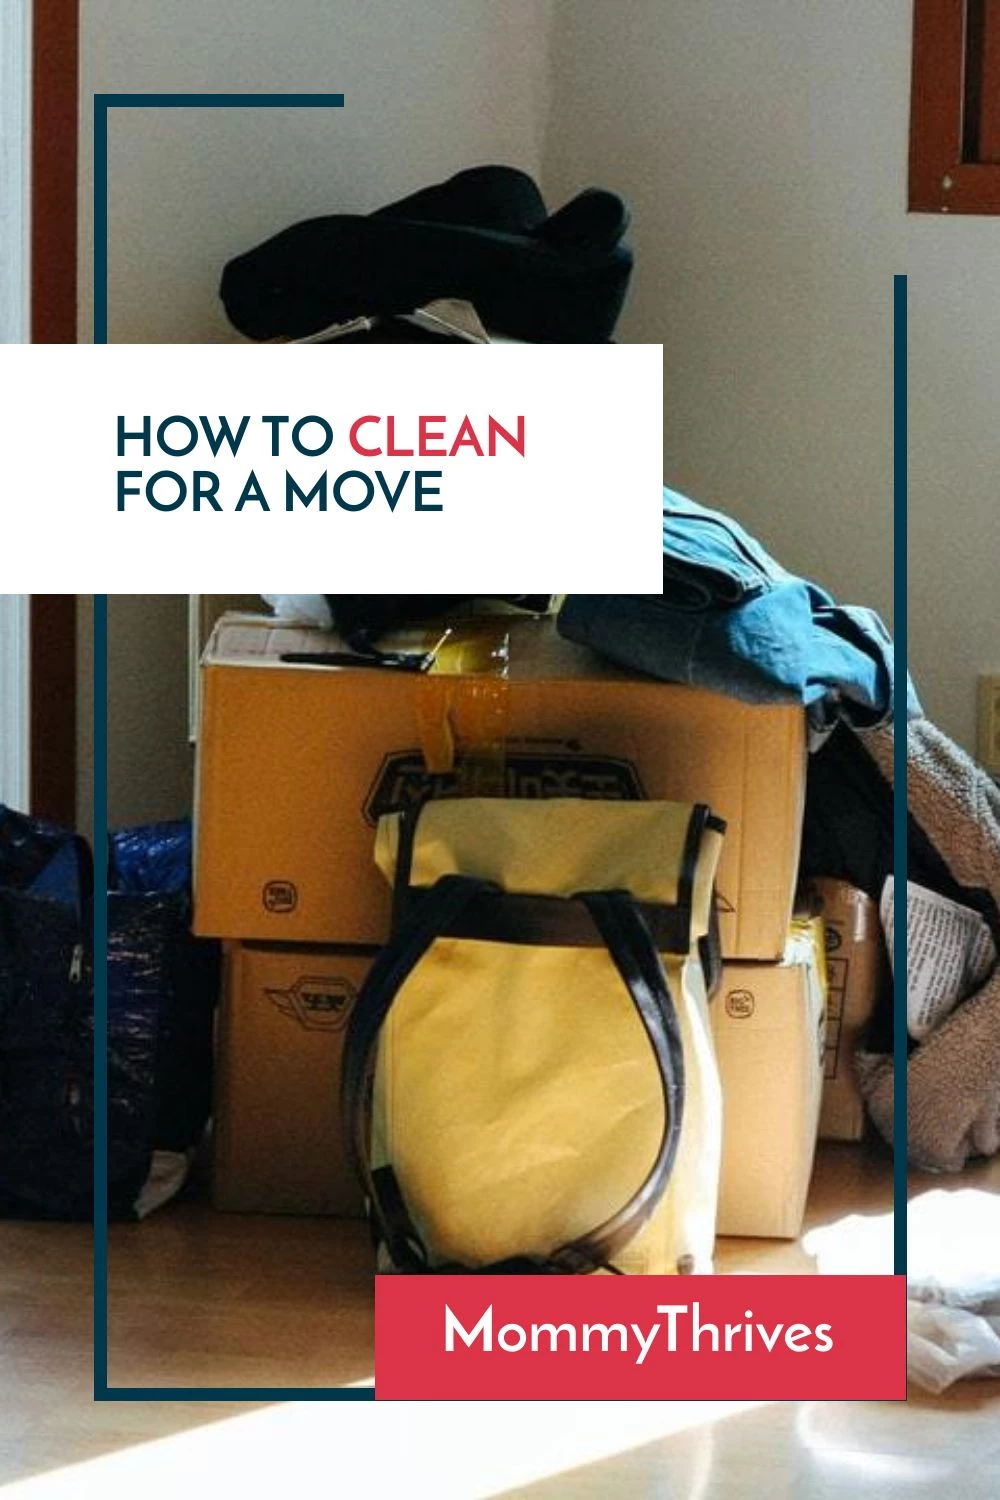 Cleaning Tips For Moving Out Of A Rental - Rental Deep Cleaning Tips and Tricks - Rental Cleaning For Move Out